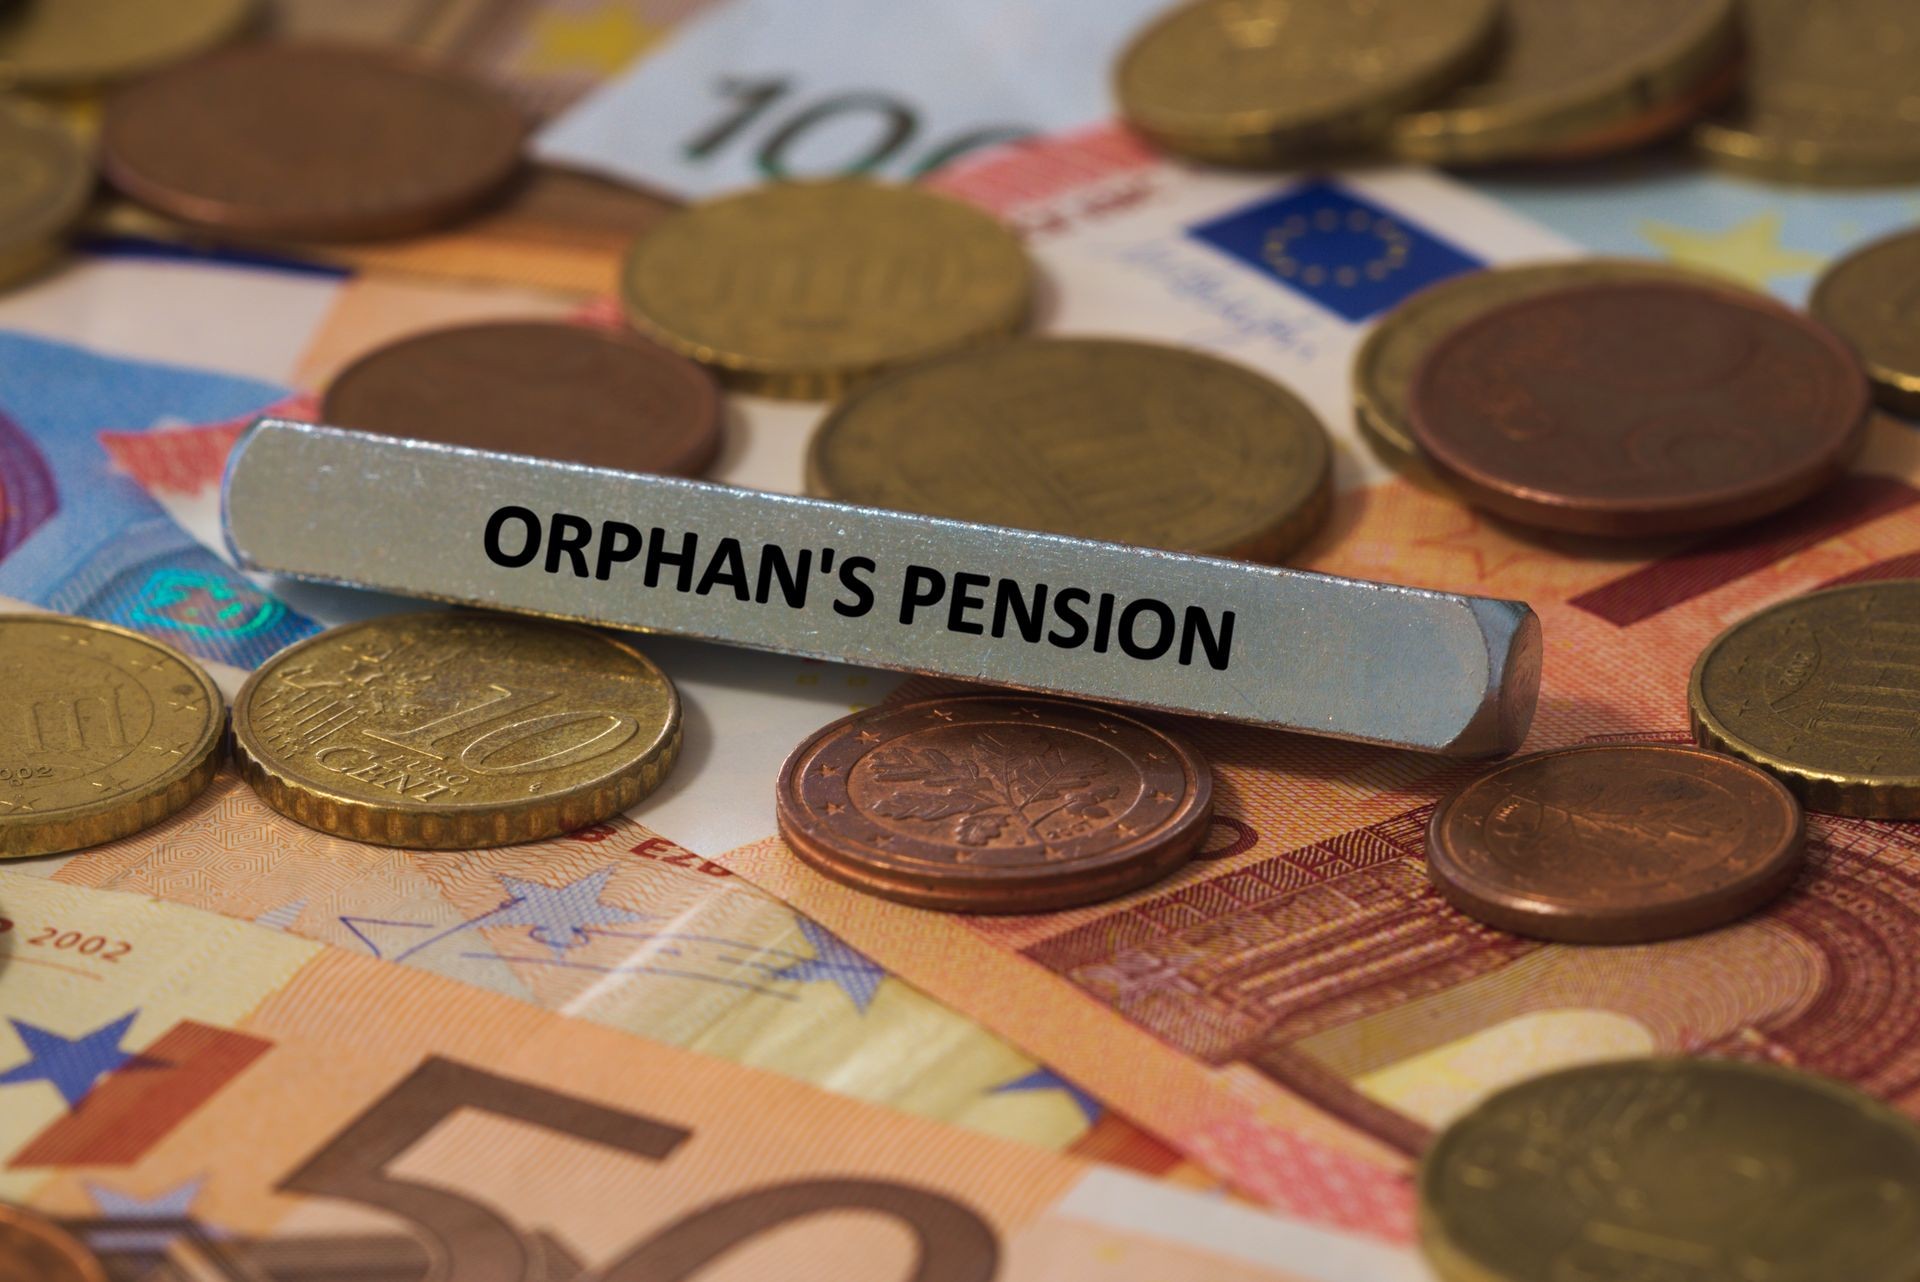 orphan's pension - the word was printed on a metal bar. the metal bar was placed on several banknotes